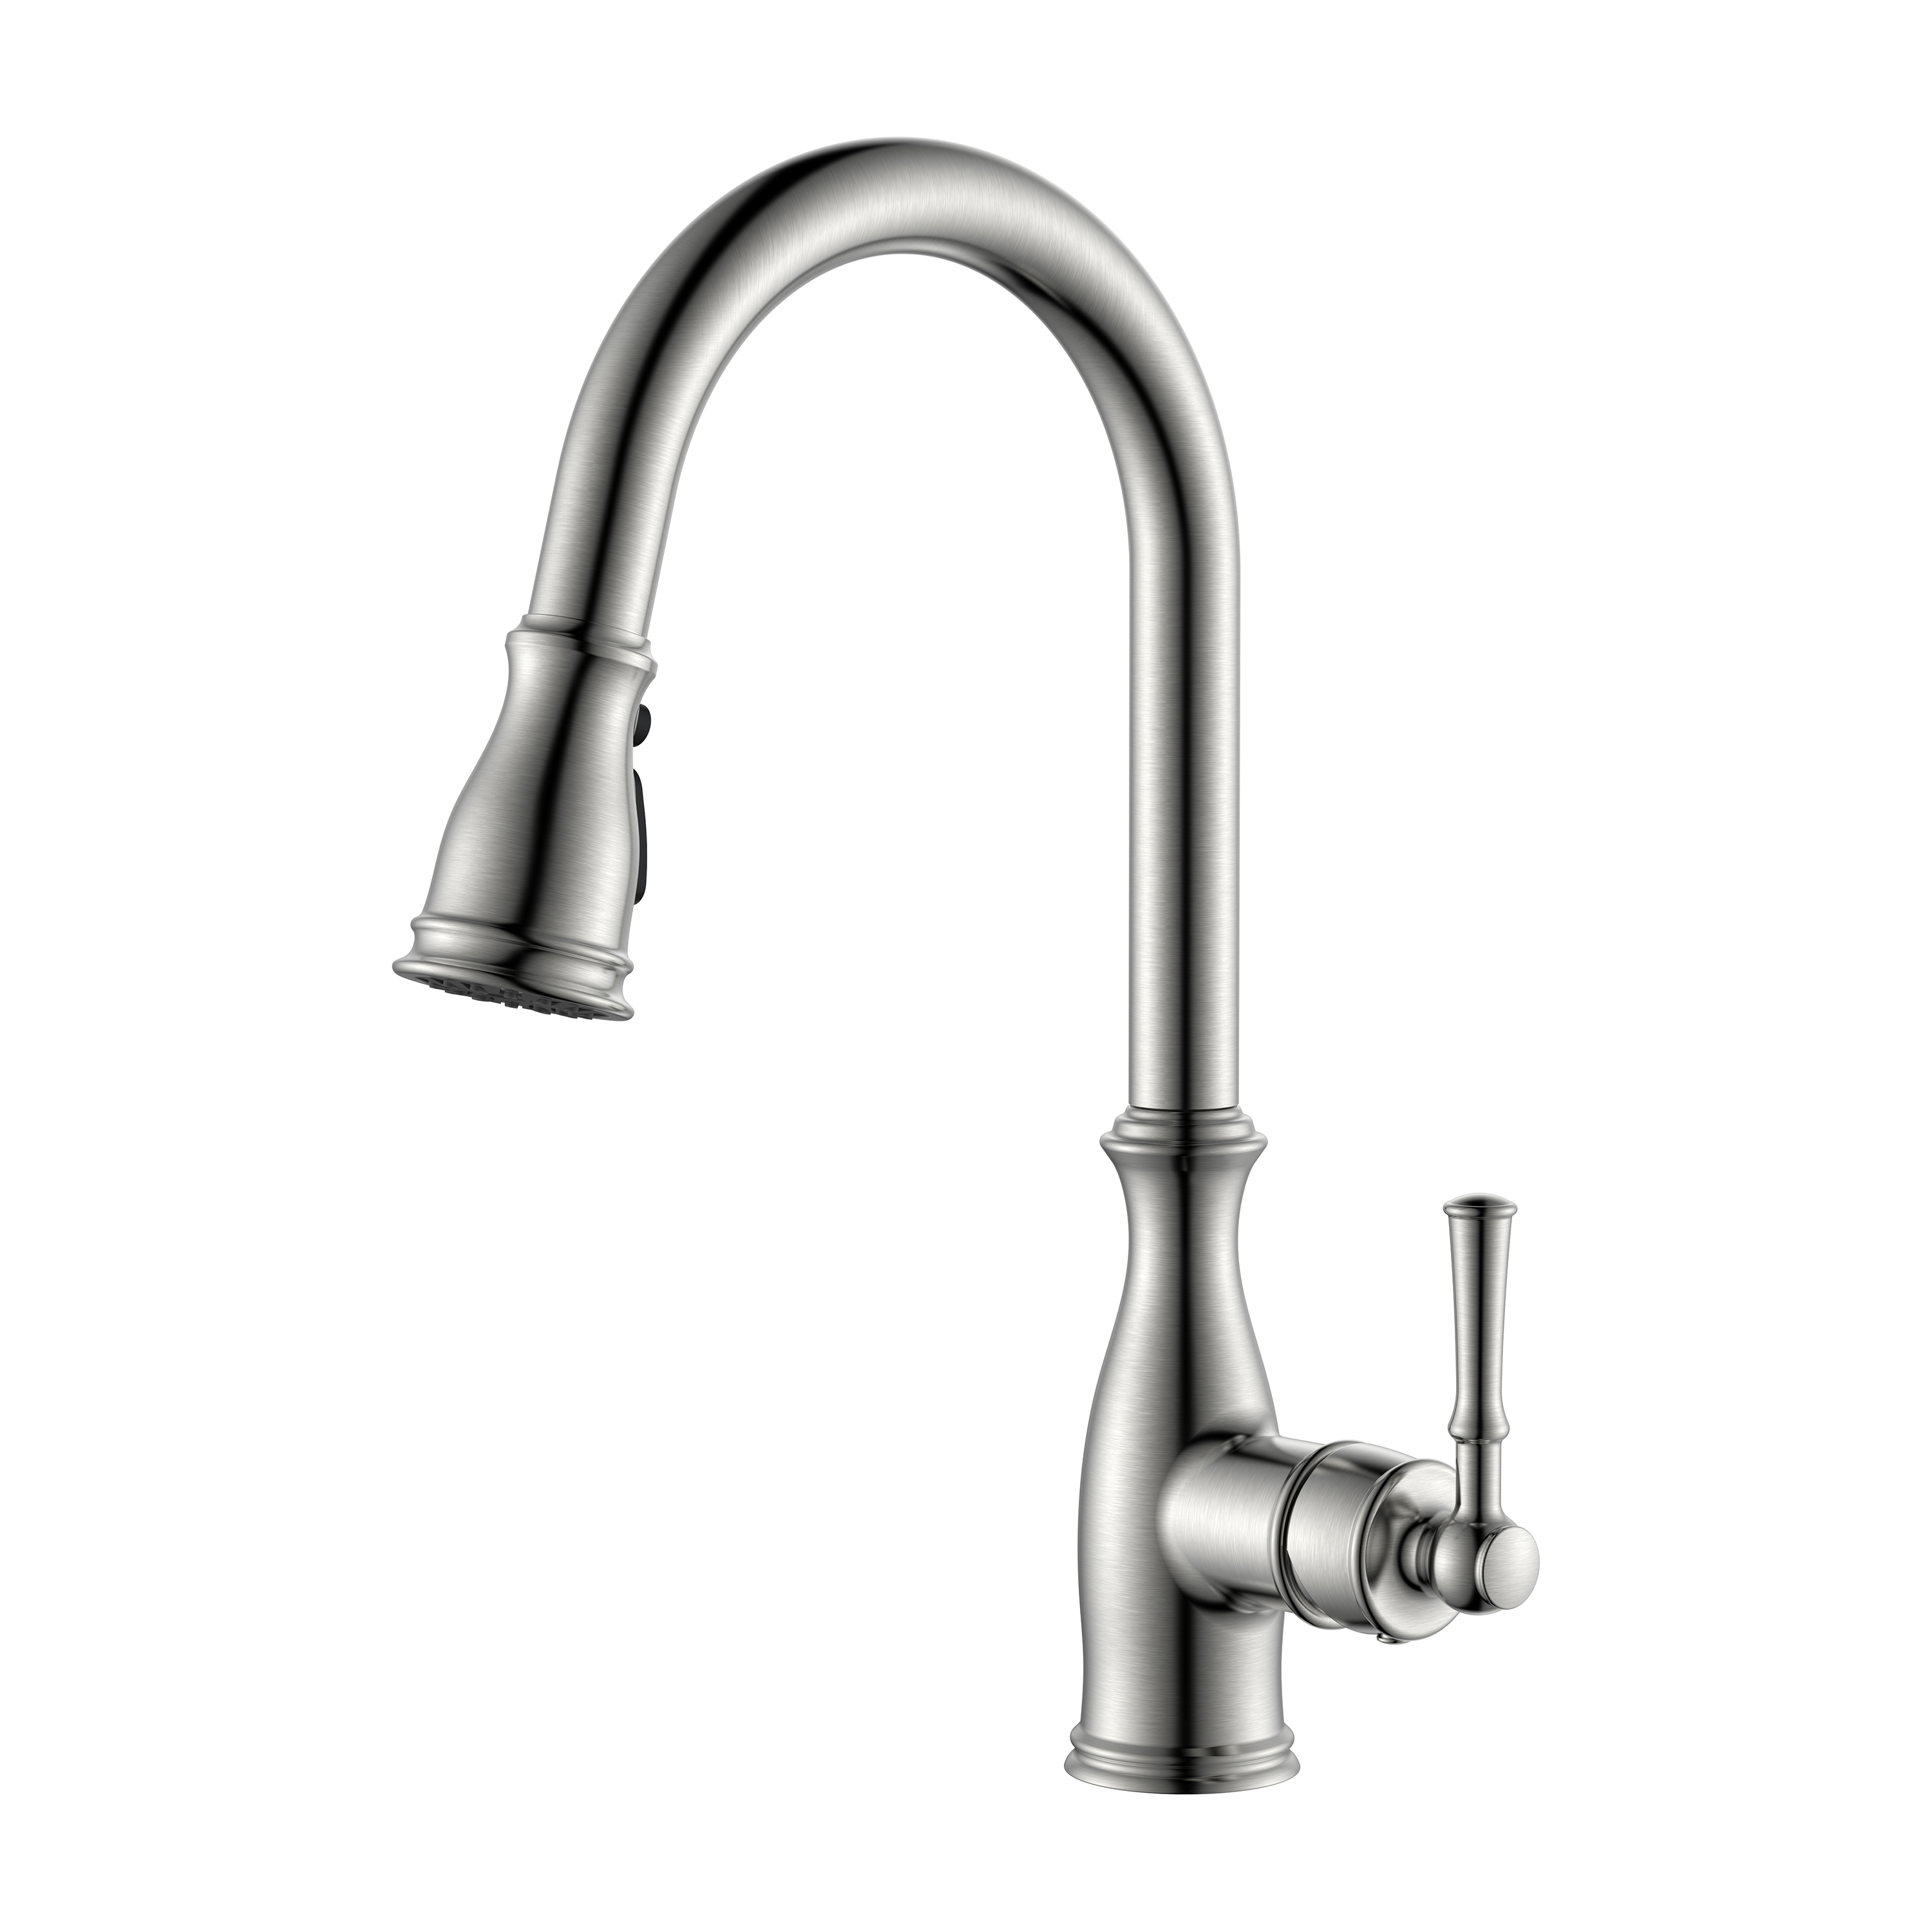  Brushed Nickle Kitchen Faucet Pull-Down Kitchen Faucet 